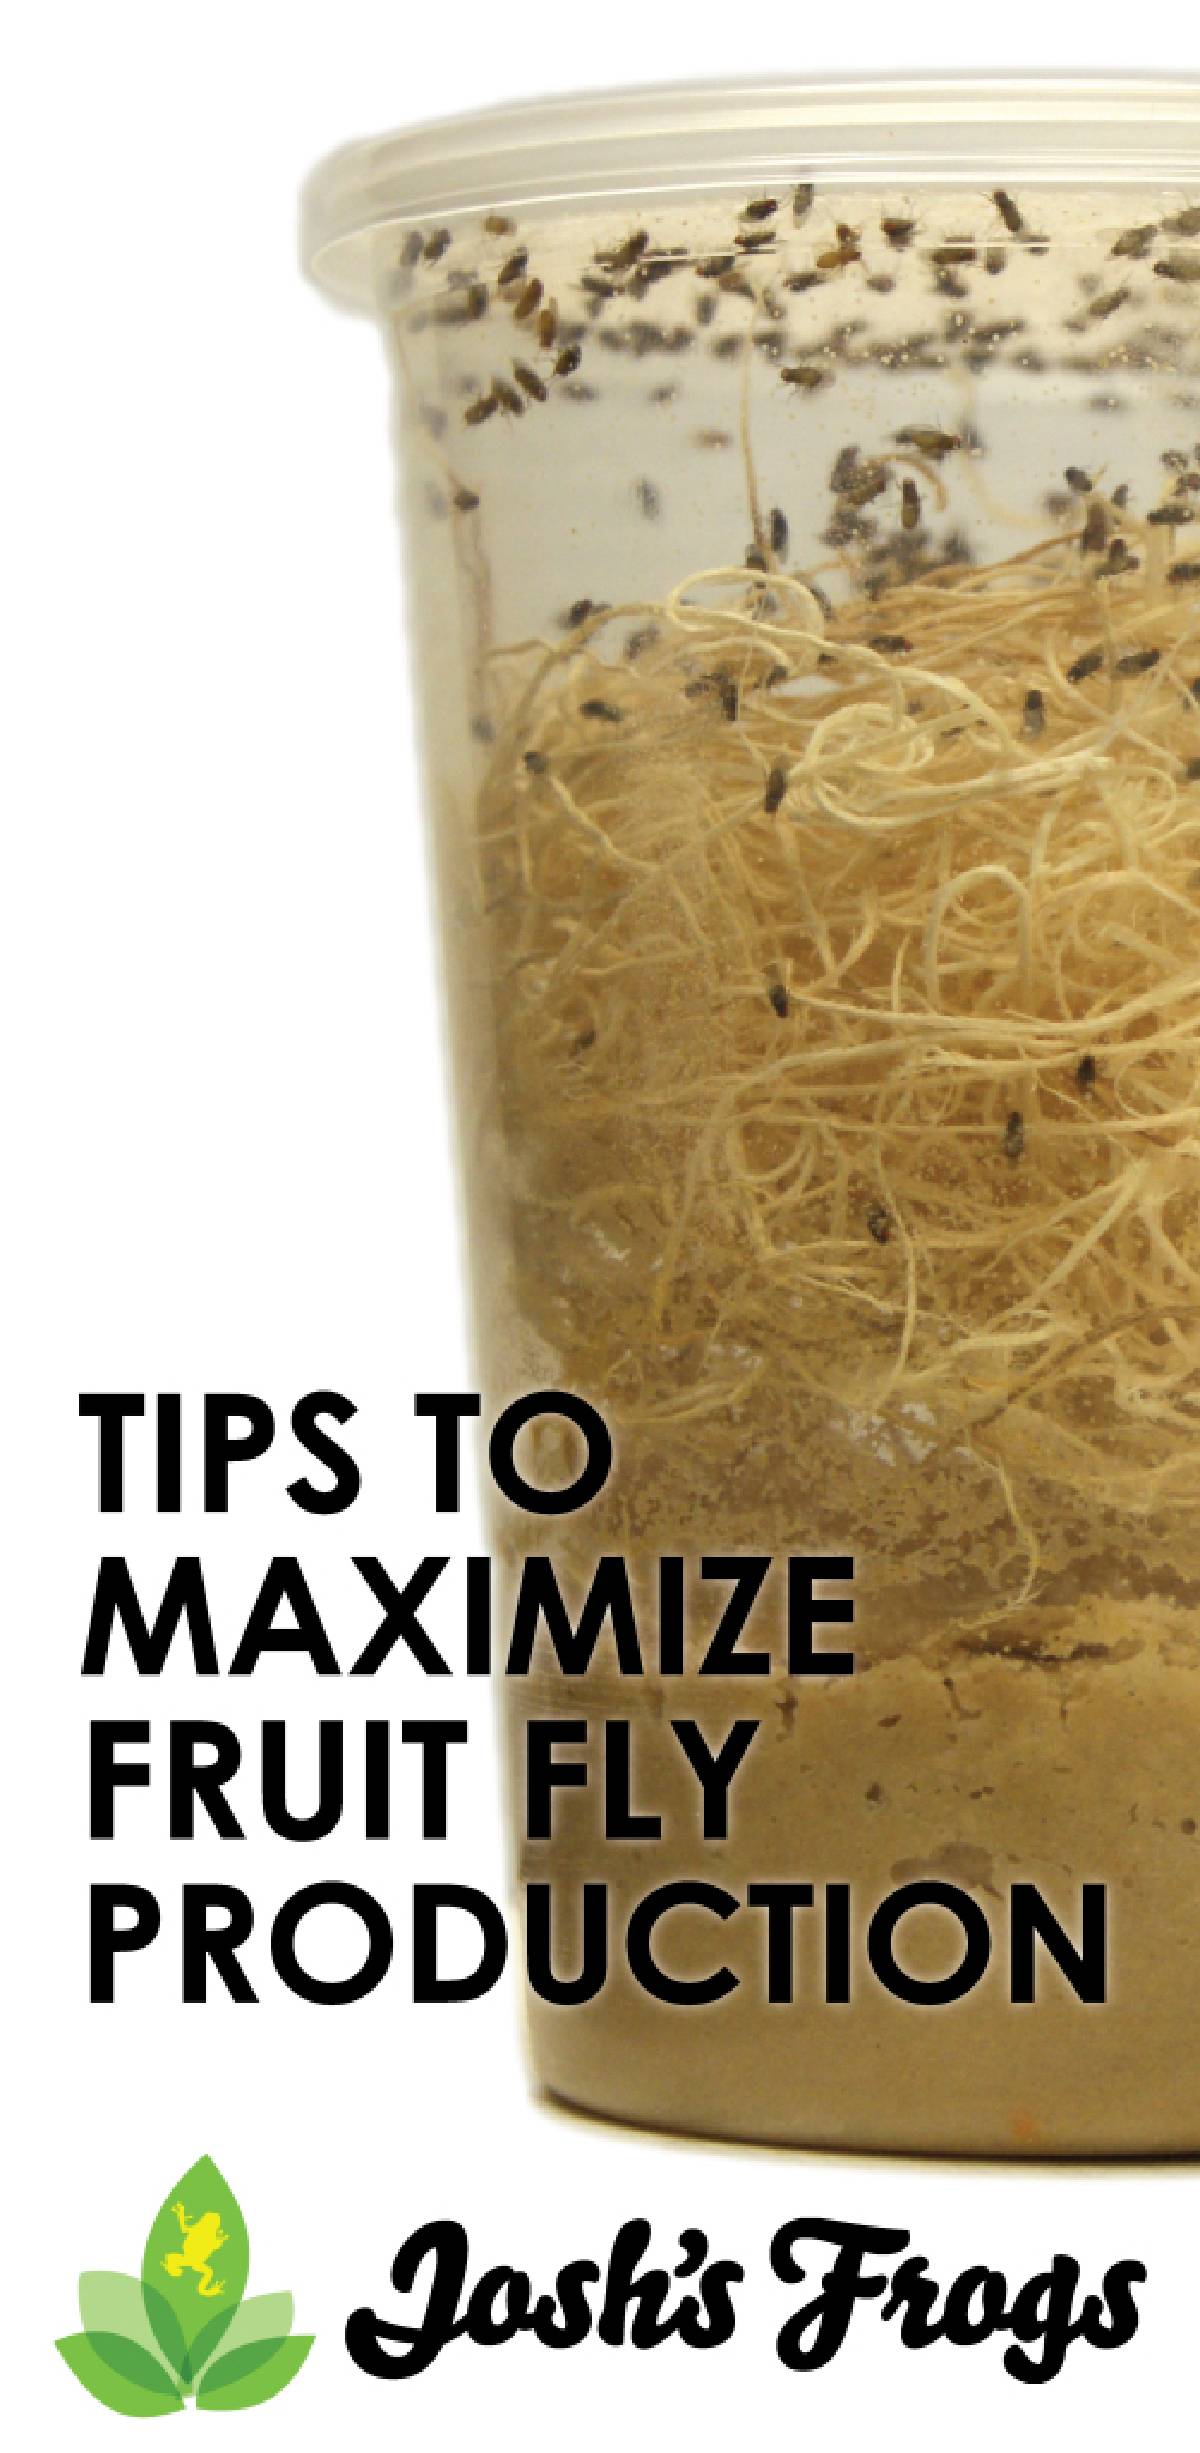 tips to maximize fruit flie production Josh's frogs feeder insects-01